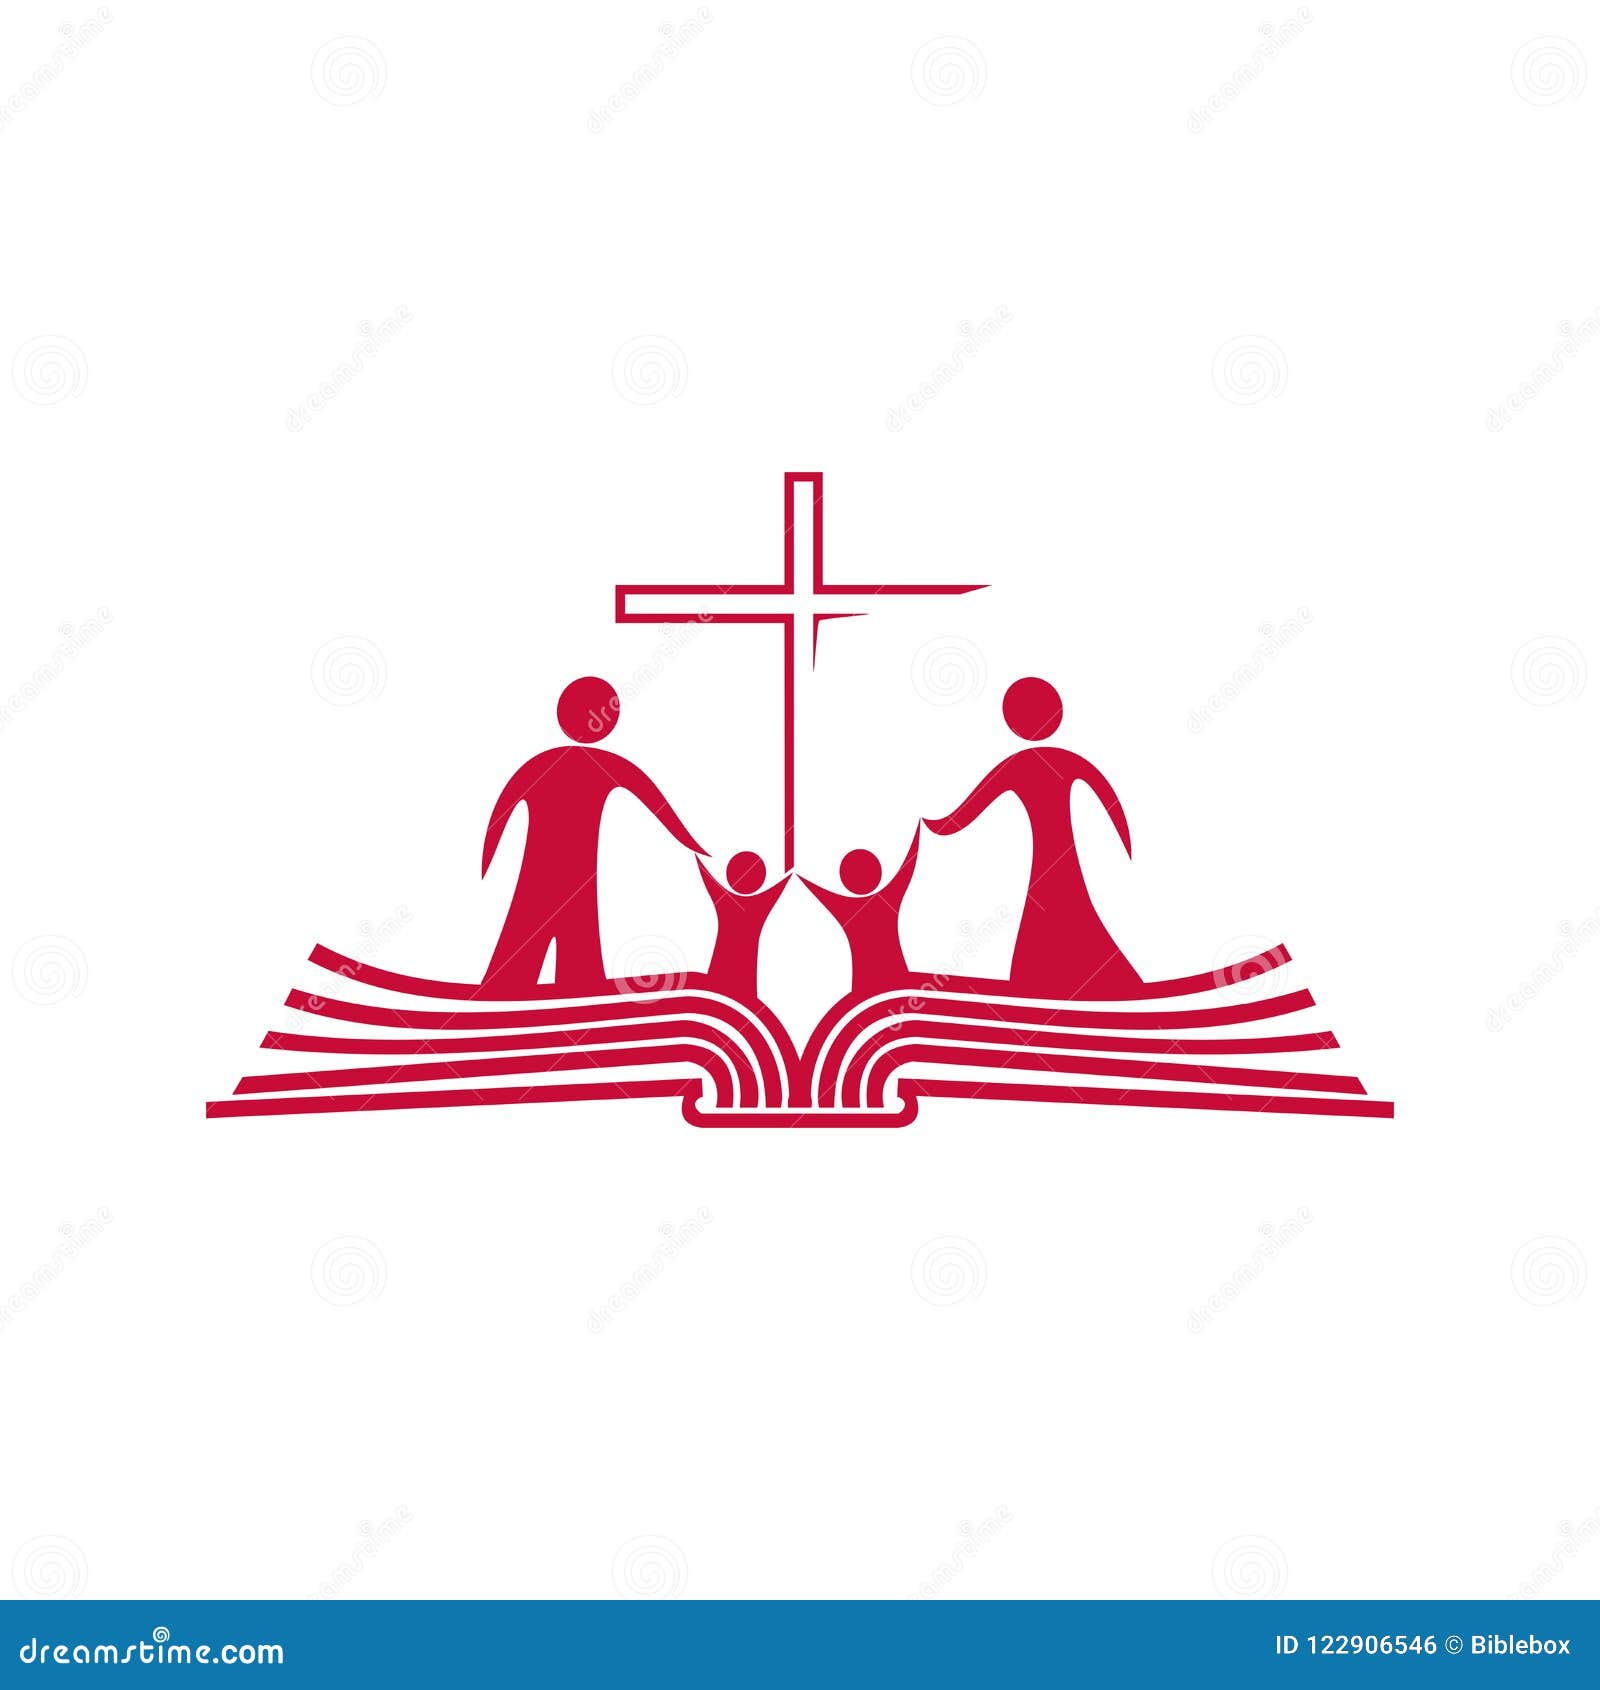 Church Logo Christian Symbols The Bible And The Family In Christ Stock Vector Illustration Of Bibles Jesus